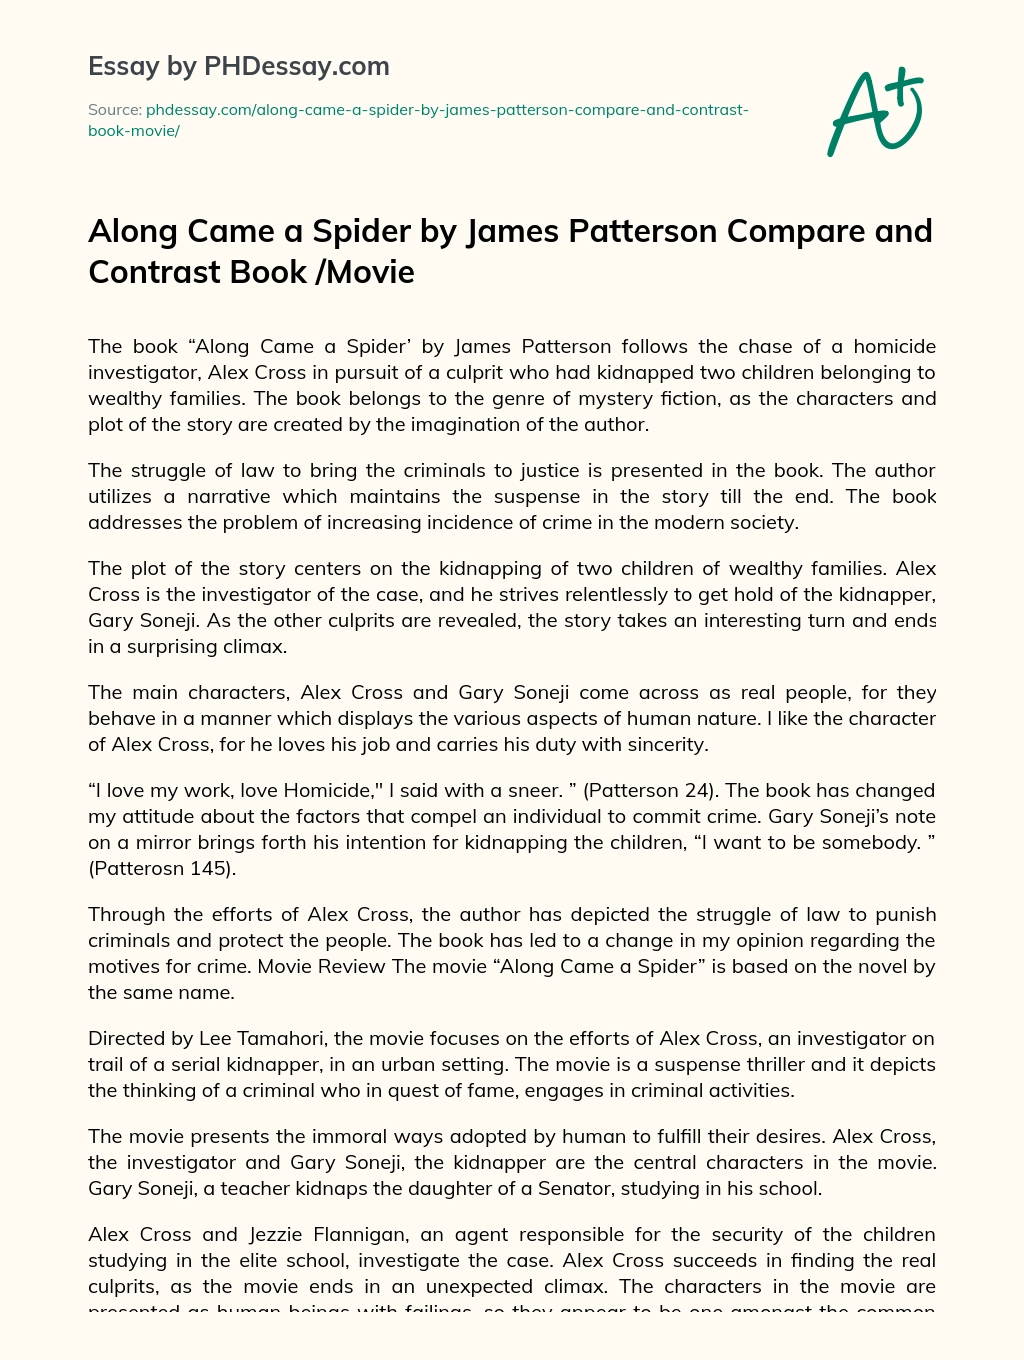 Along Came a Spider by James Patterson Compare and Contrast Book /Movie essay